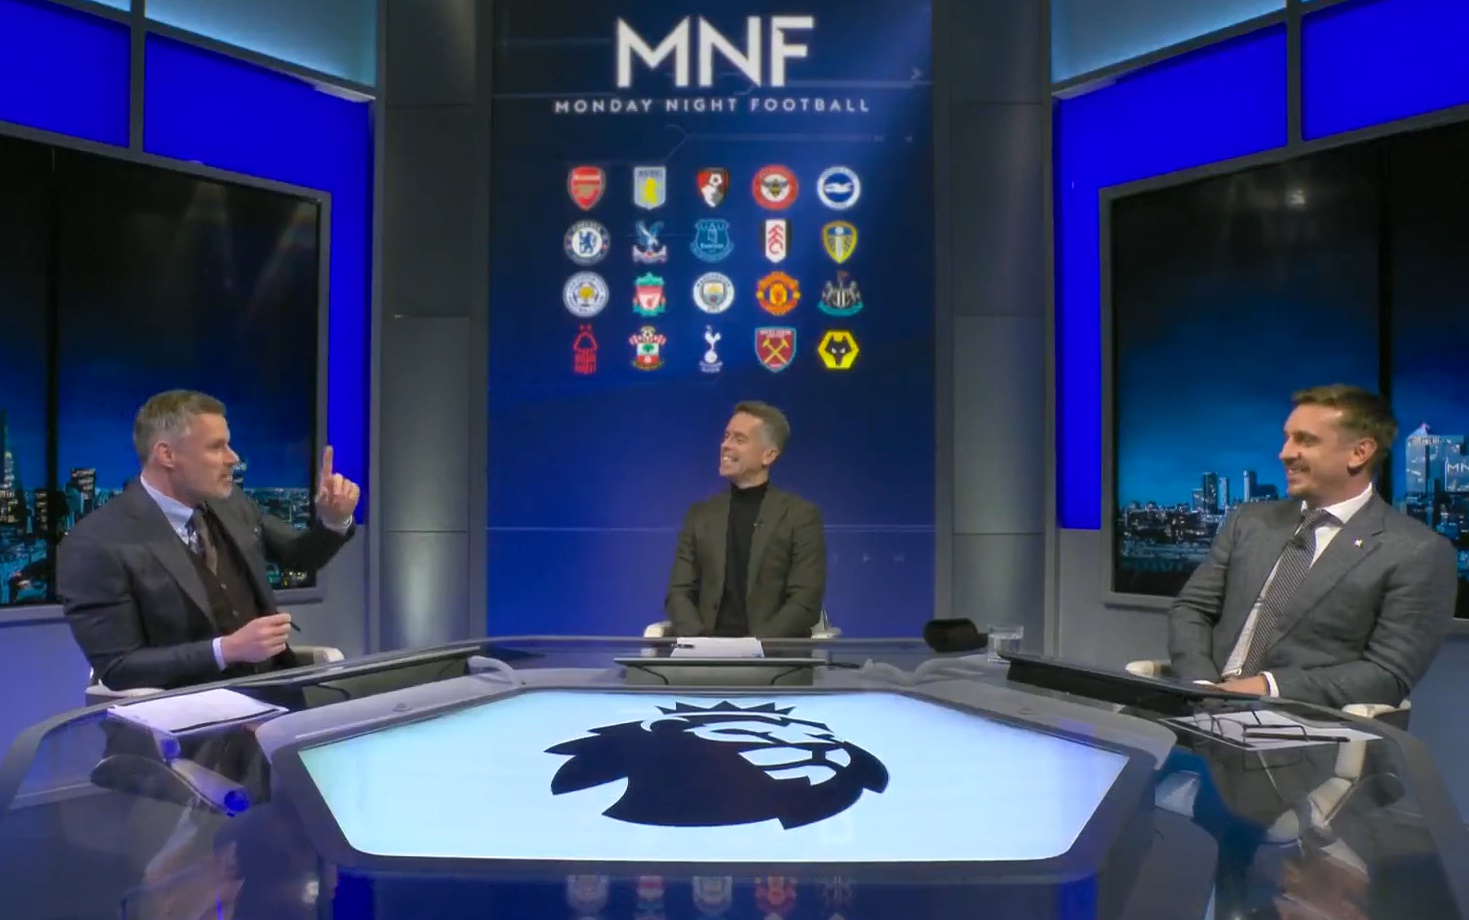 (Video) Jamie Carragher shuts down Neville with eye-catching stat which sums up Salah’s brilliance